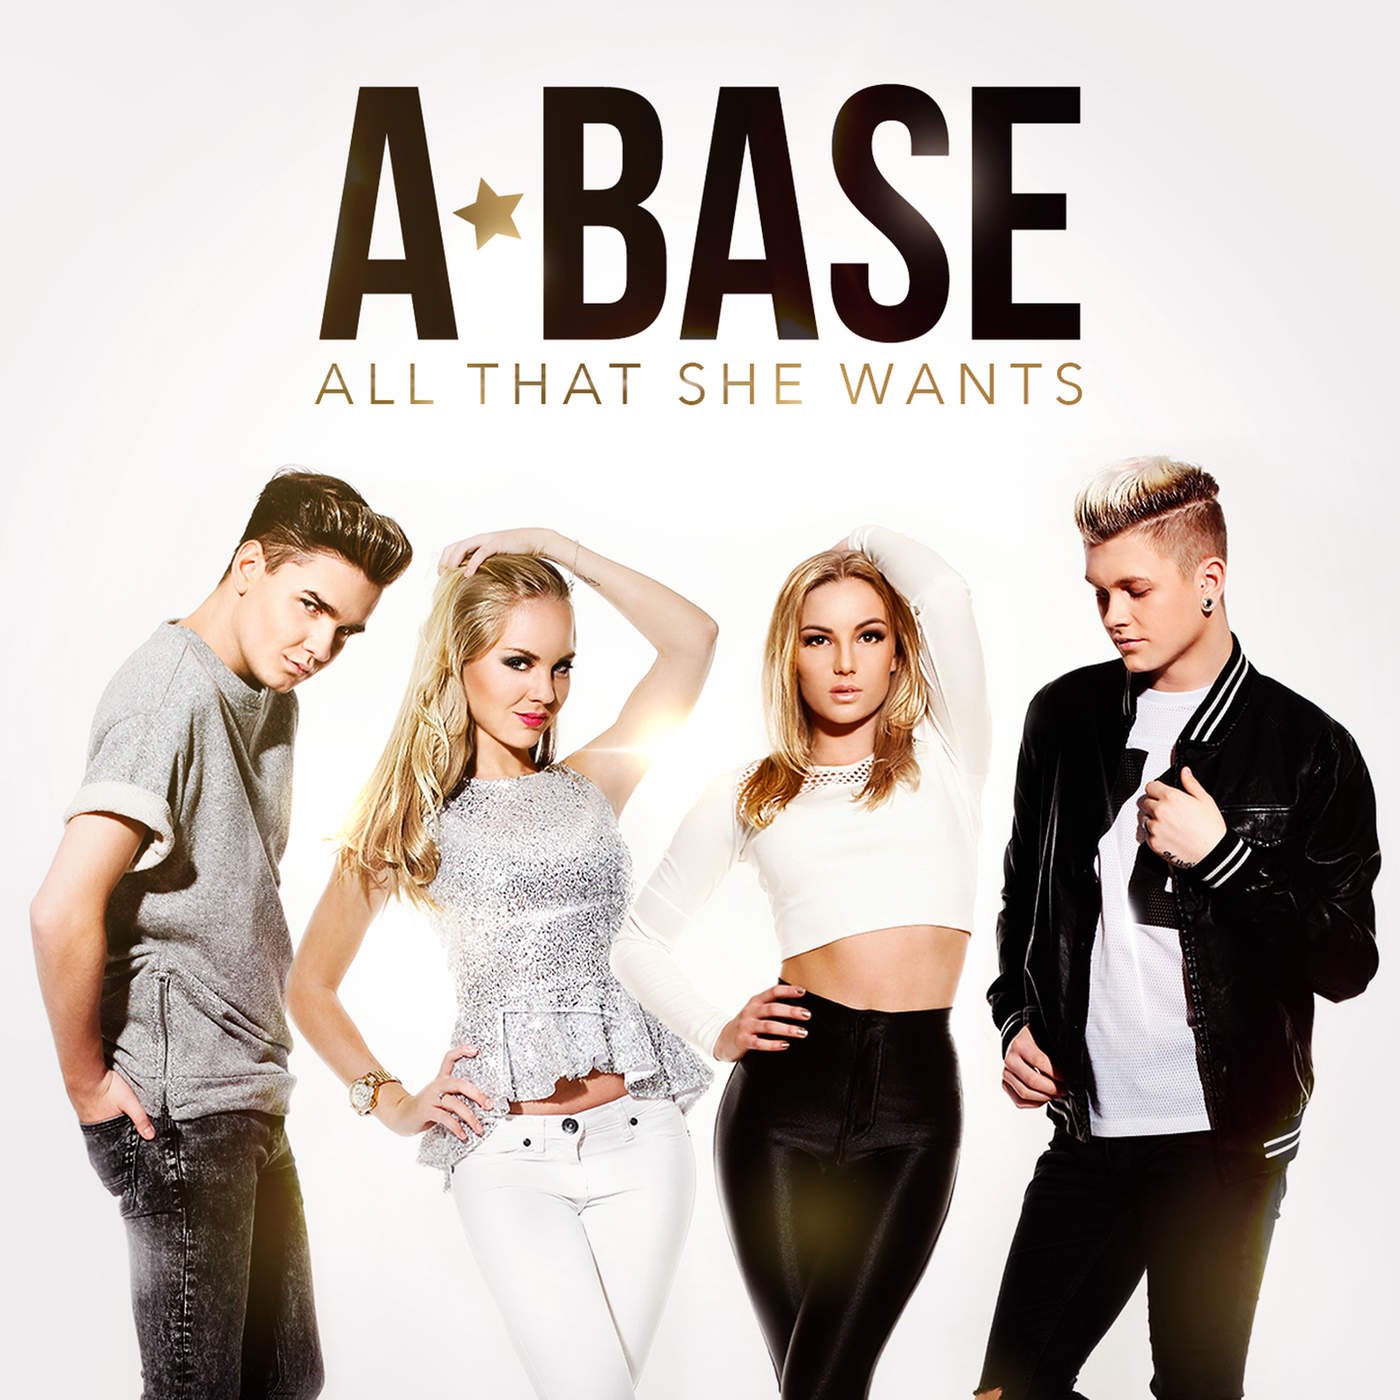 She wants на русском. Ace of Base all that she wants альбом. Ace of Base all that she wants обложка. Ace of Base Ace of Base - all that she wants. Ice of Base песня all that she wants.